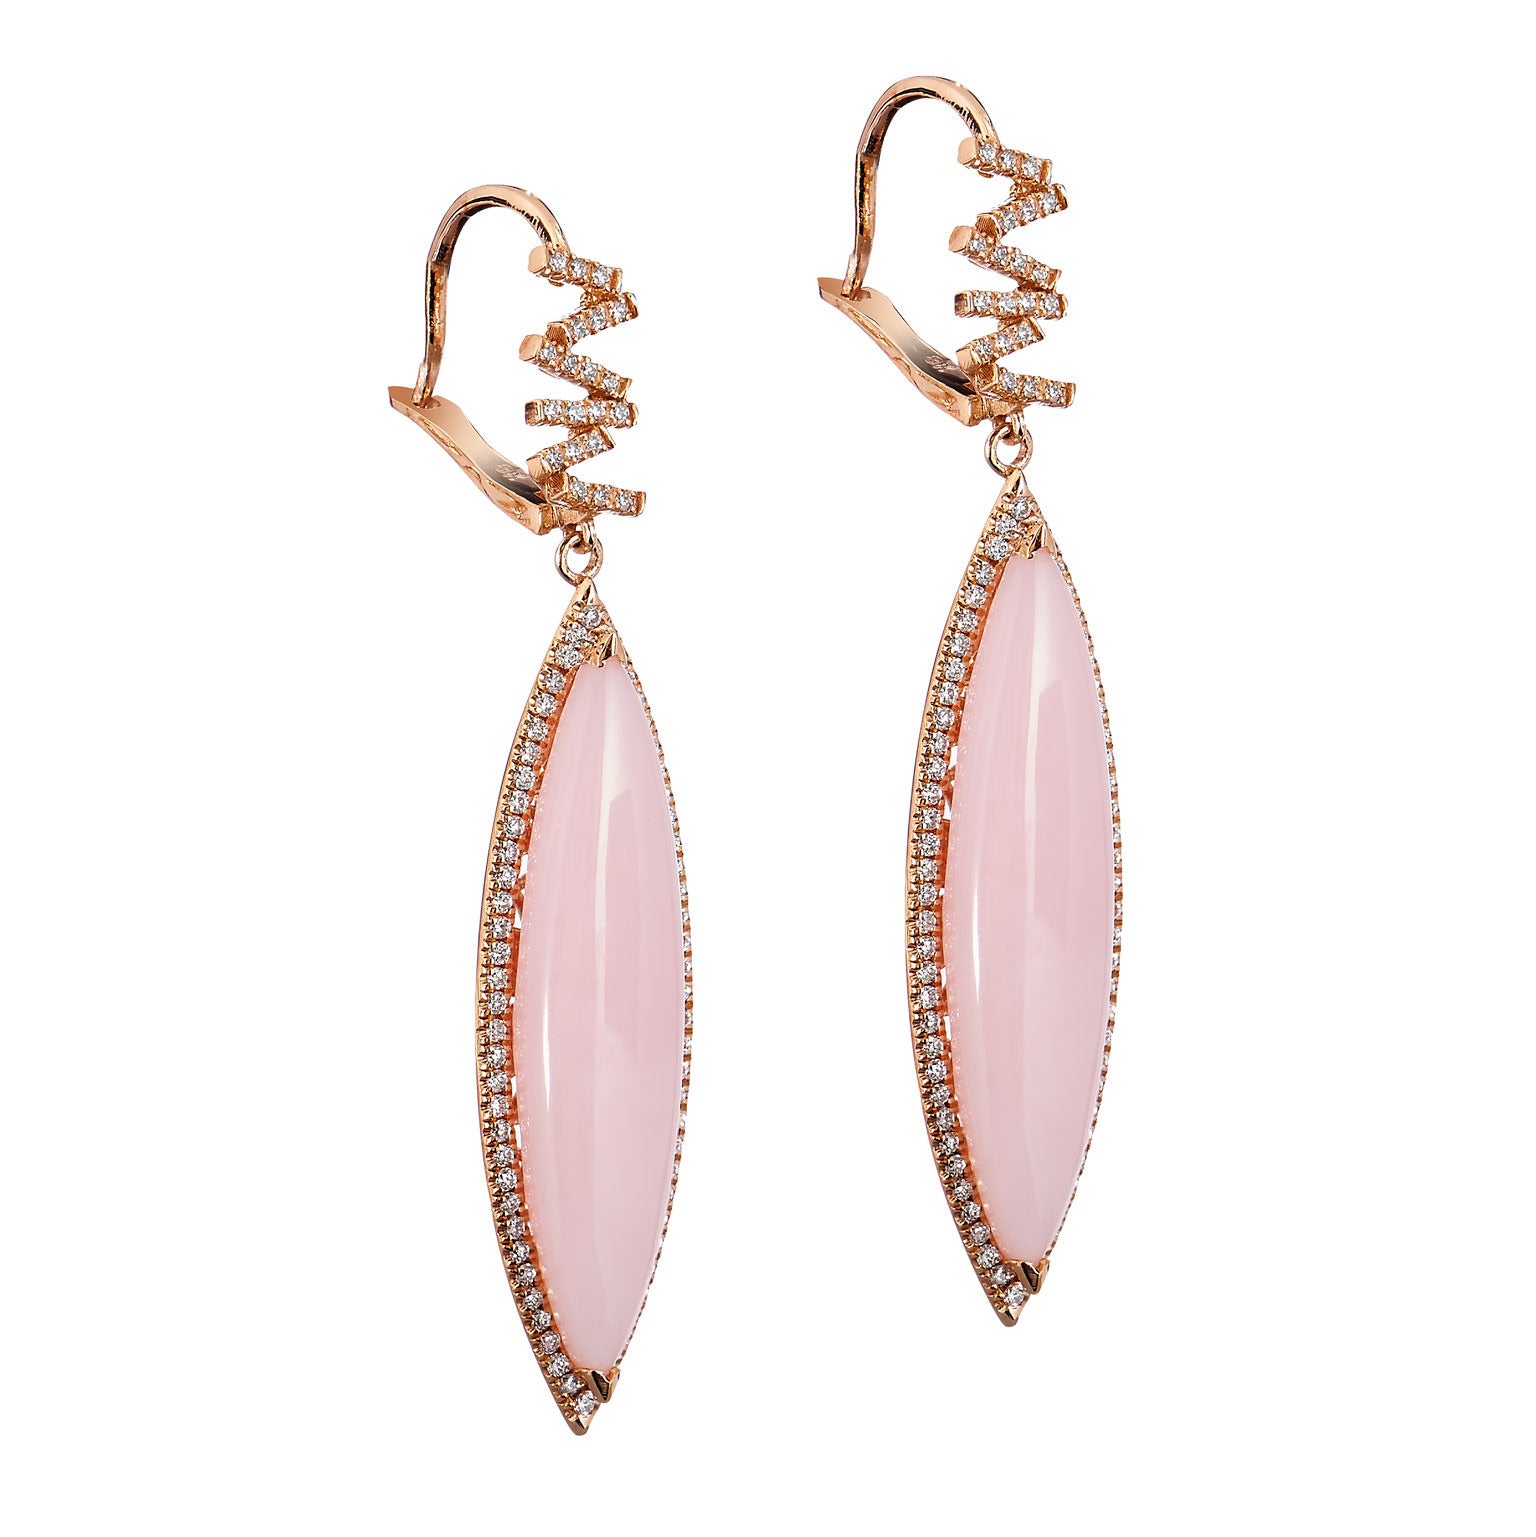 18 Karat Rose Gold And Pink Opal Earrings Earrings Curated by H